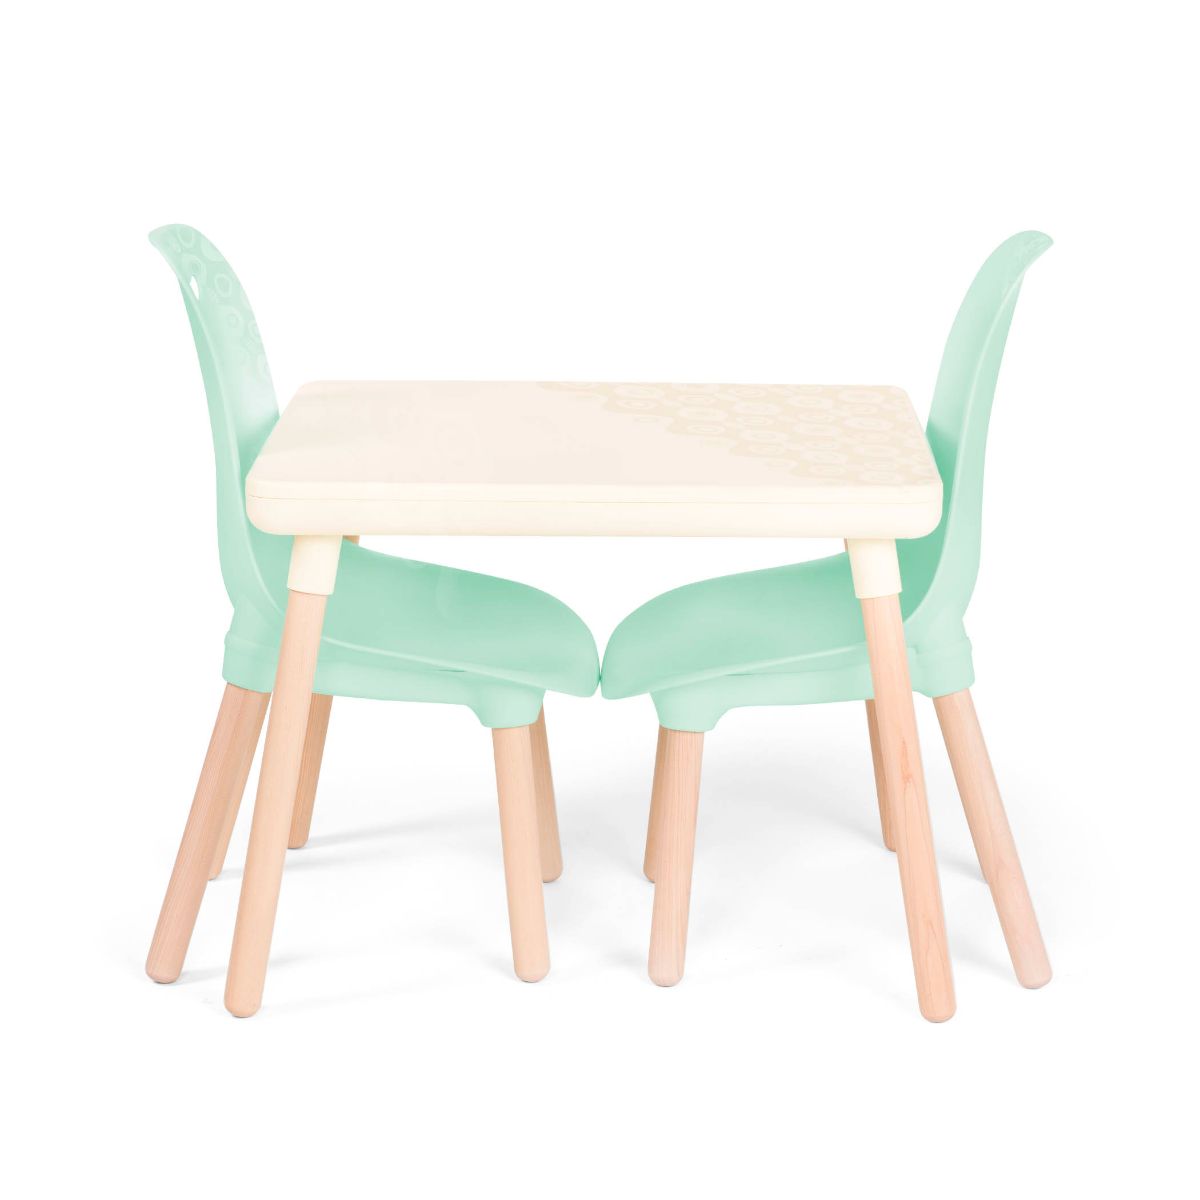 Ivory table and mint chair set